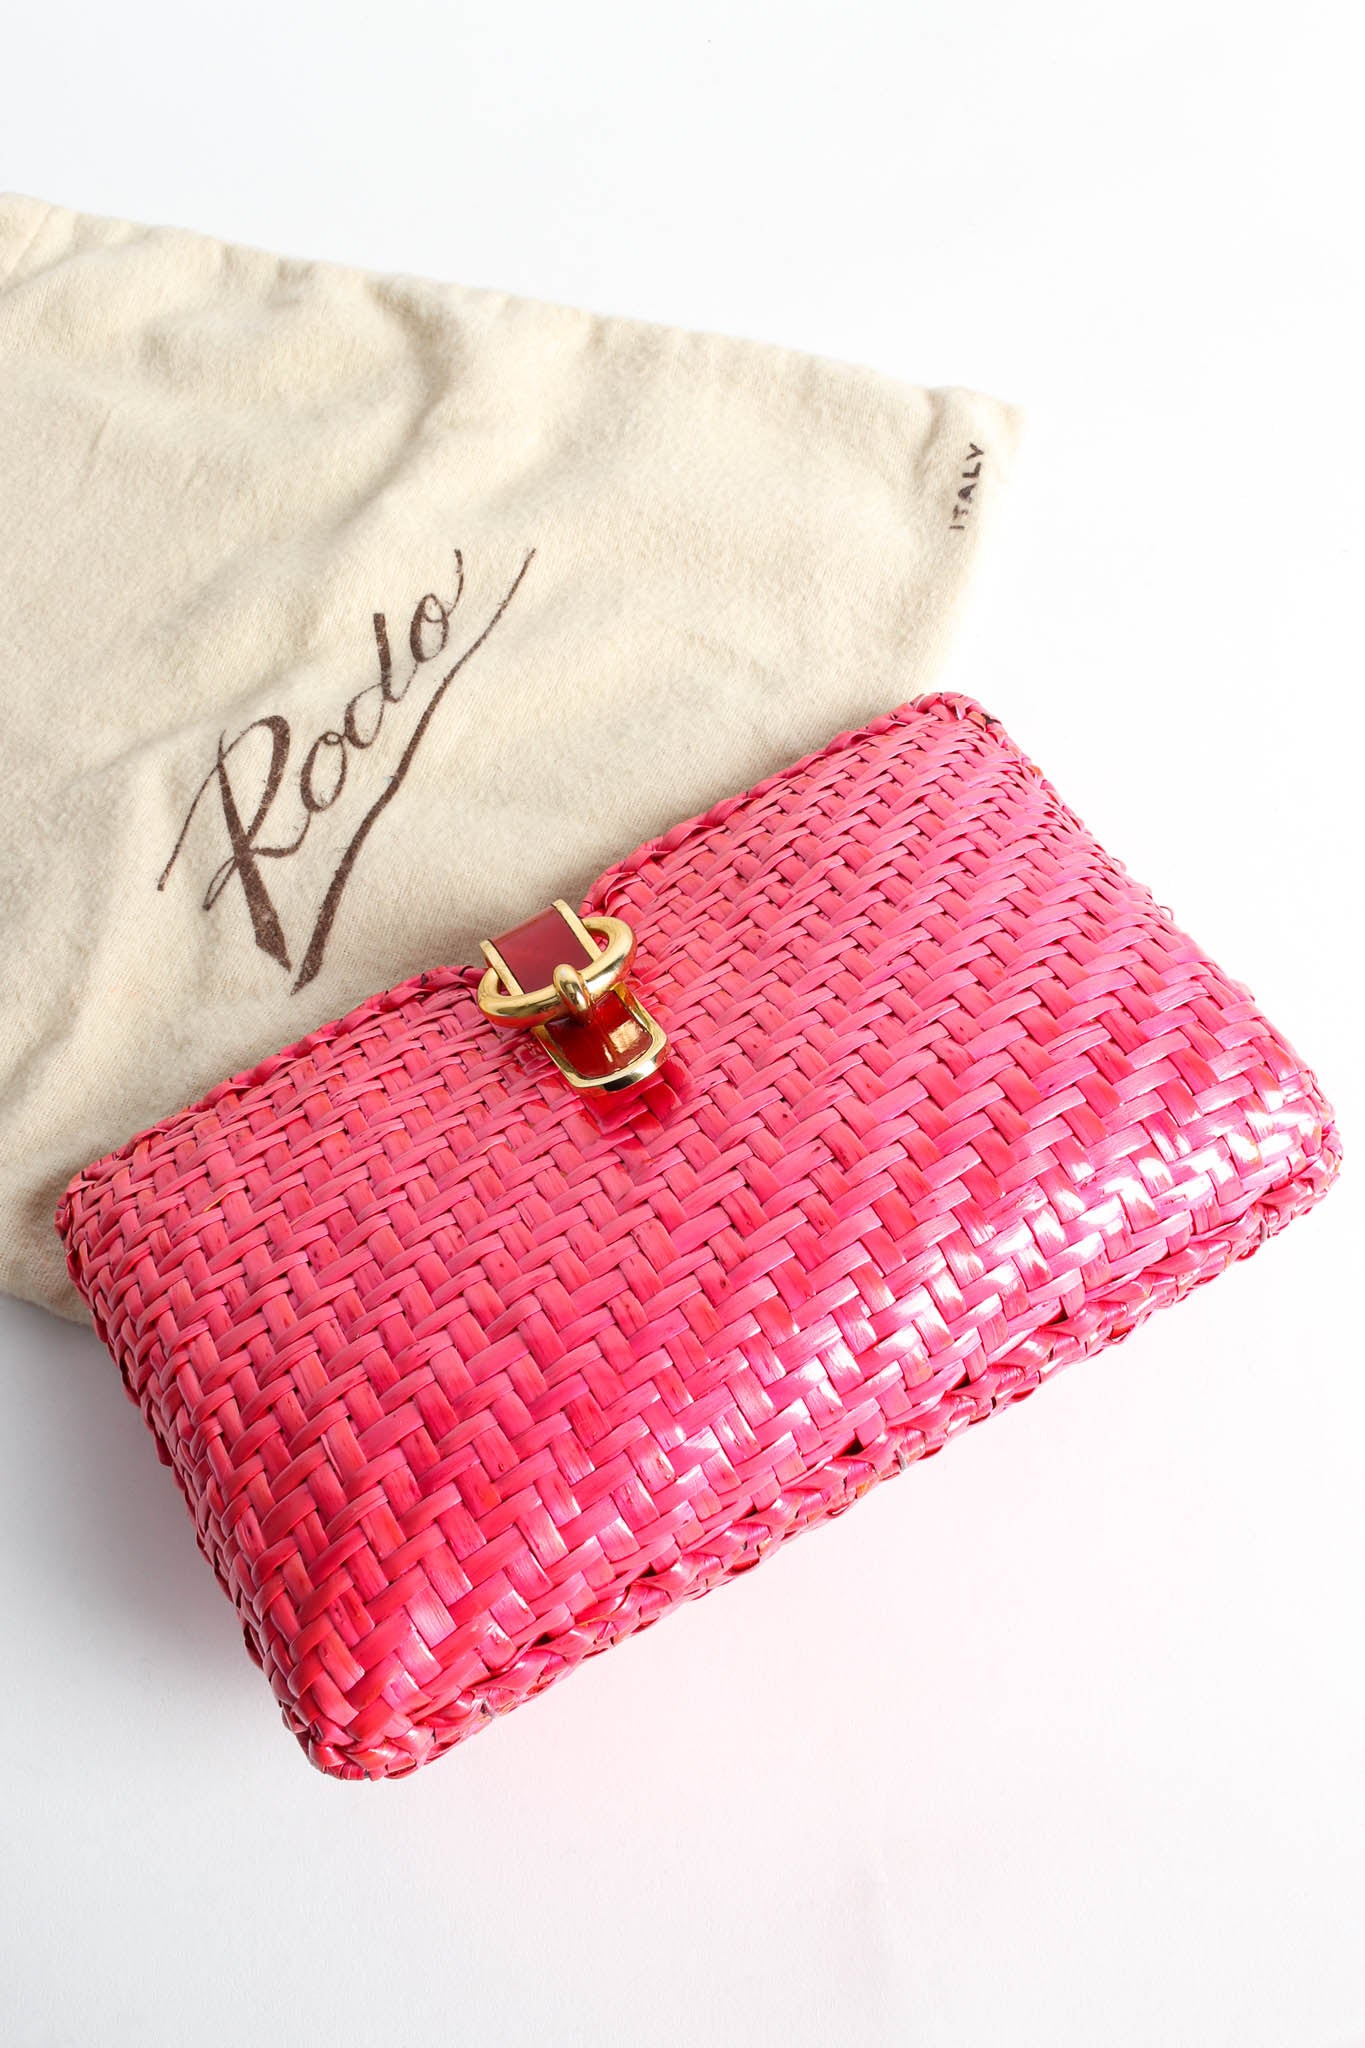 Vintage Rodo Woven Straw Shoulder Clutch flat with dust bag @ Recess Los Angeles